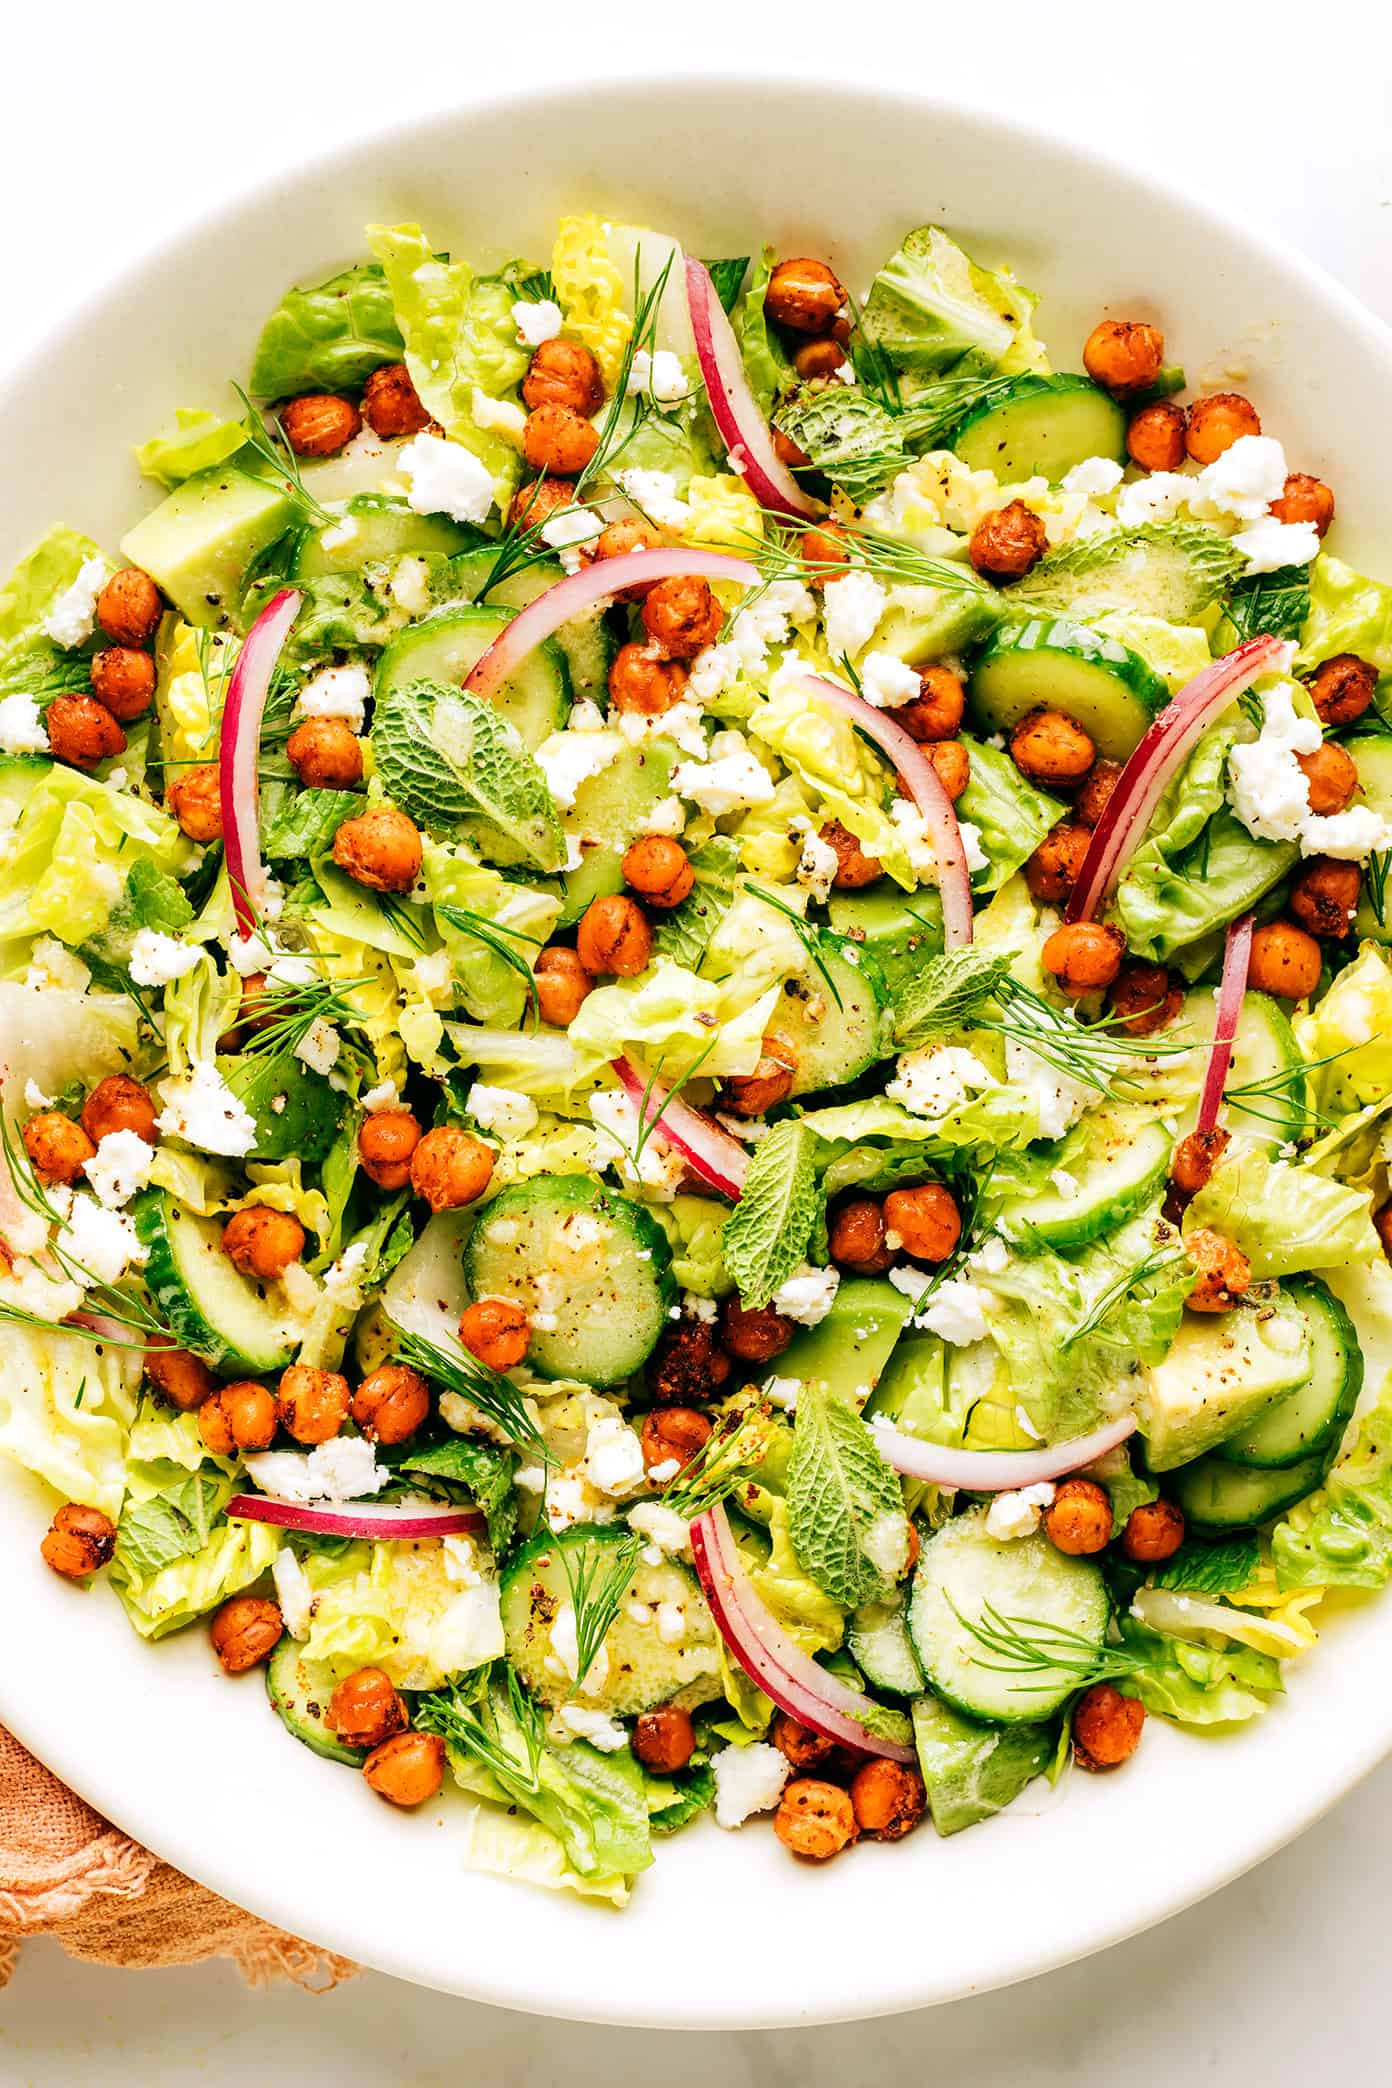 Roasted Chickpea, Avocado and Cucumber Salad